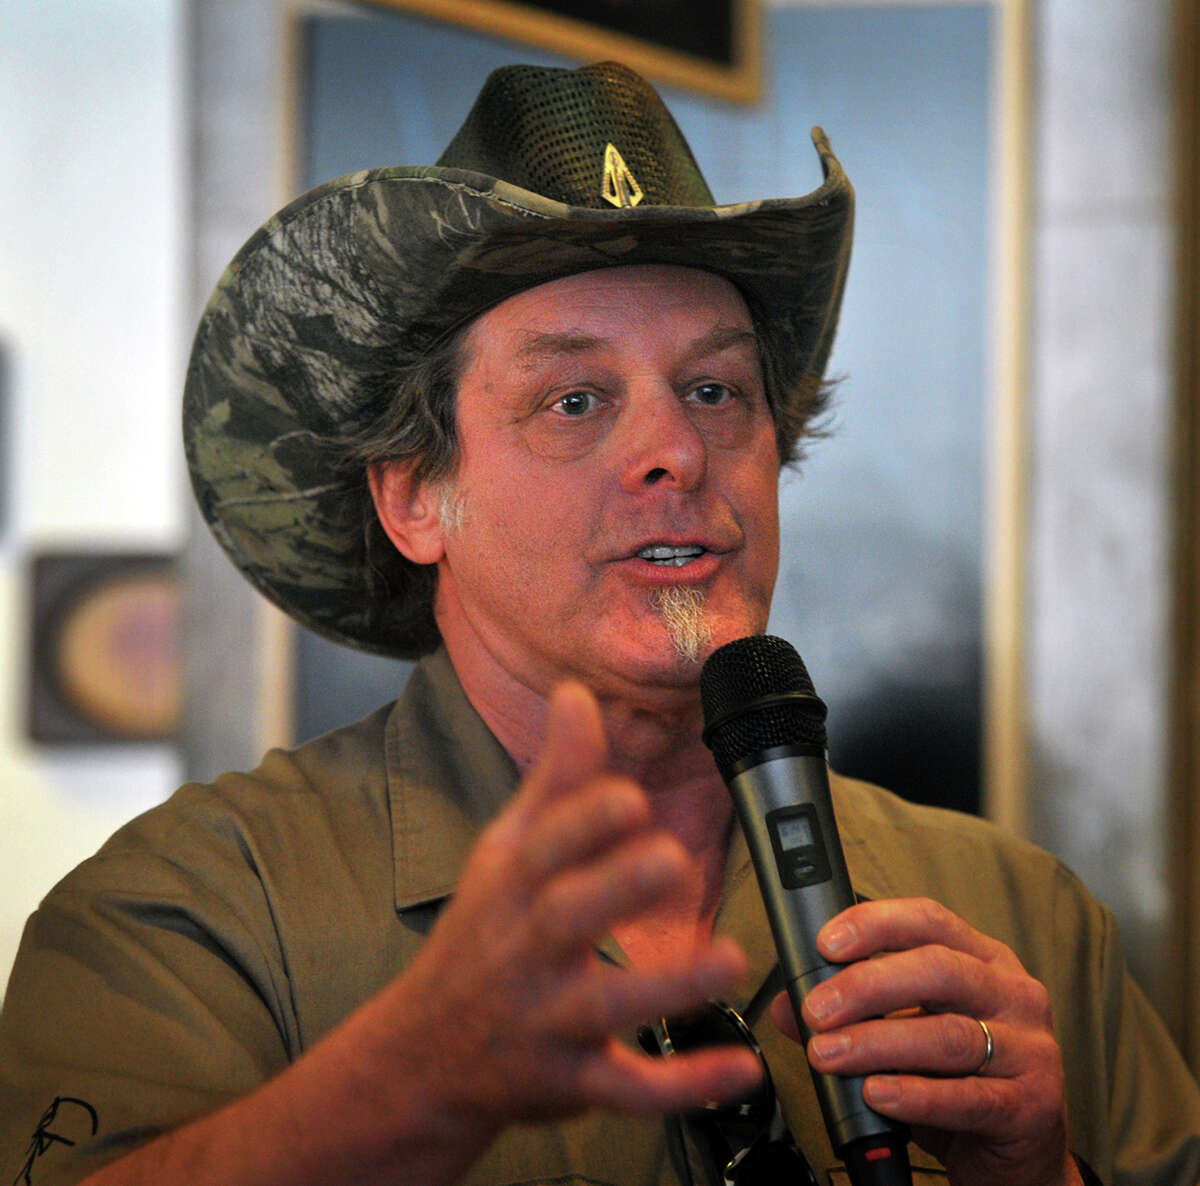 Rocker Ted Nugent speaks to a crowd of Greg Abbott supporters during a campaign stop in Wichita Falls, Texas on Tuesday, Feb. 18, 2014. (AP Photo/Wichita Falls Times Record News, Torin Halsey)